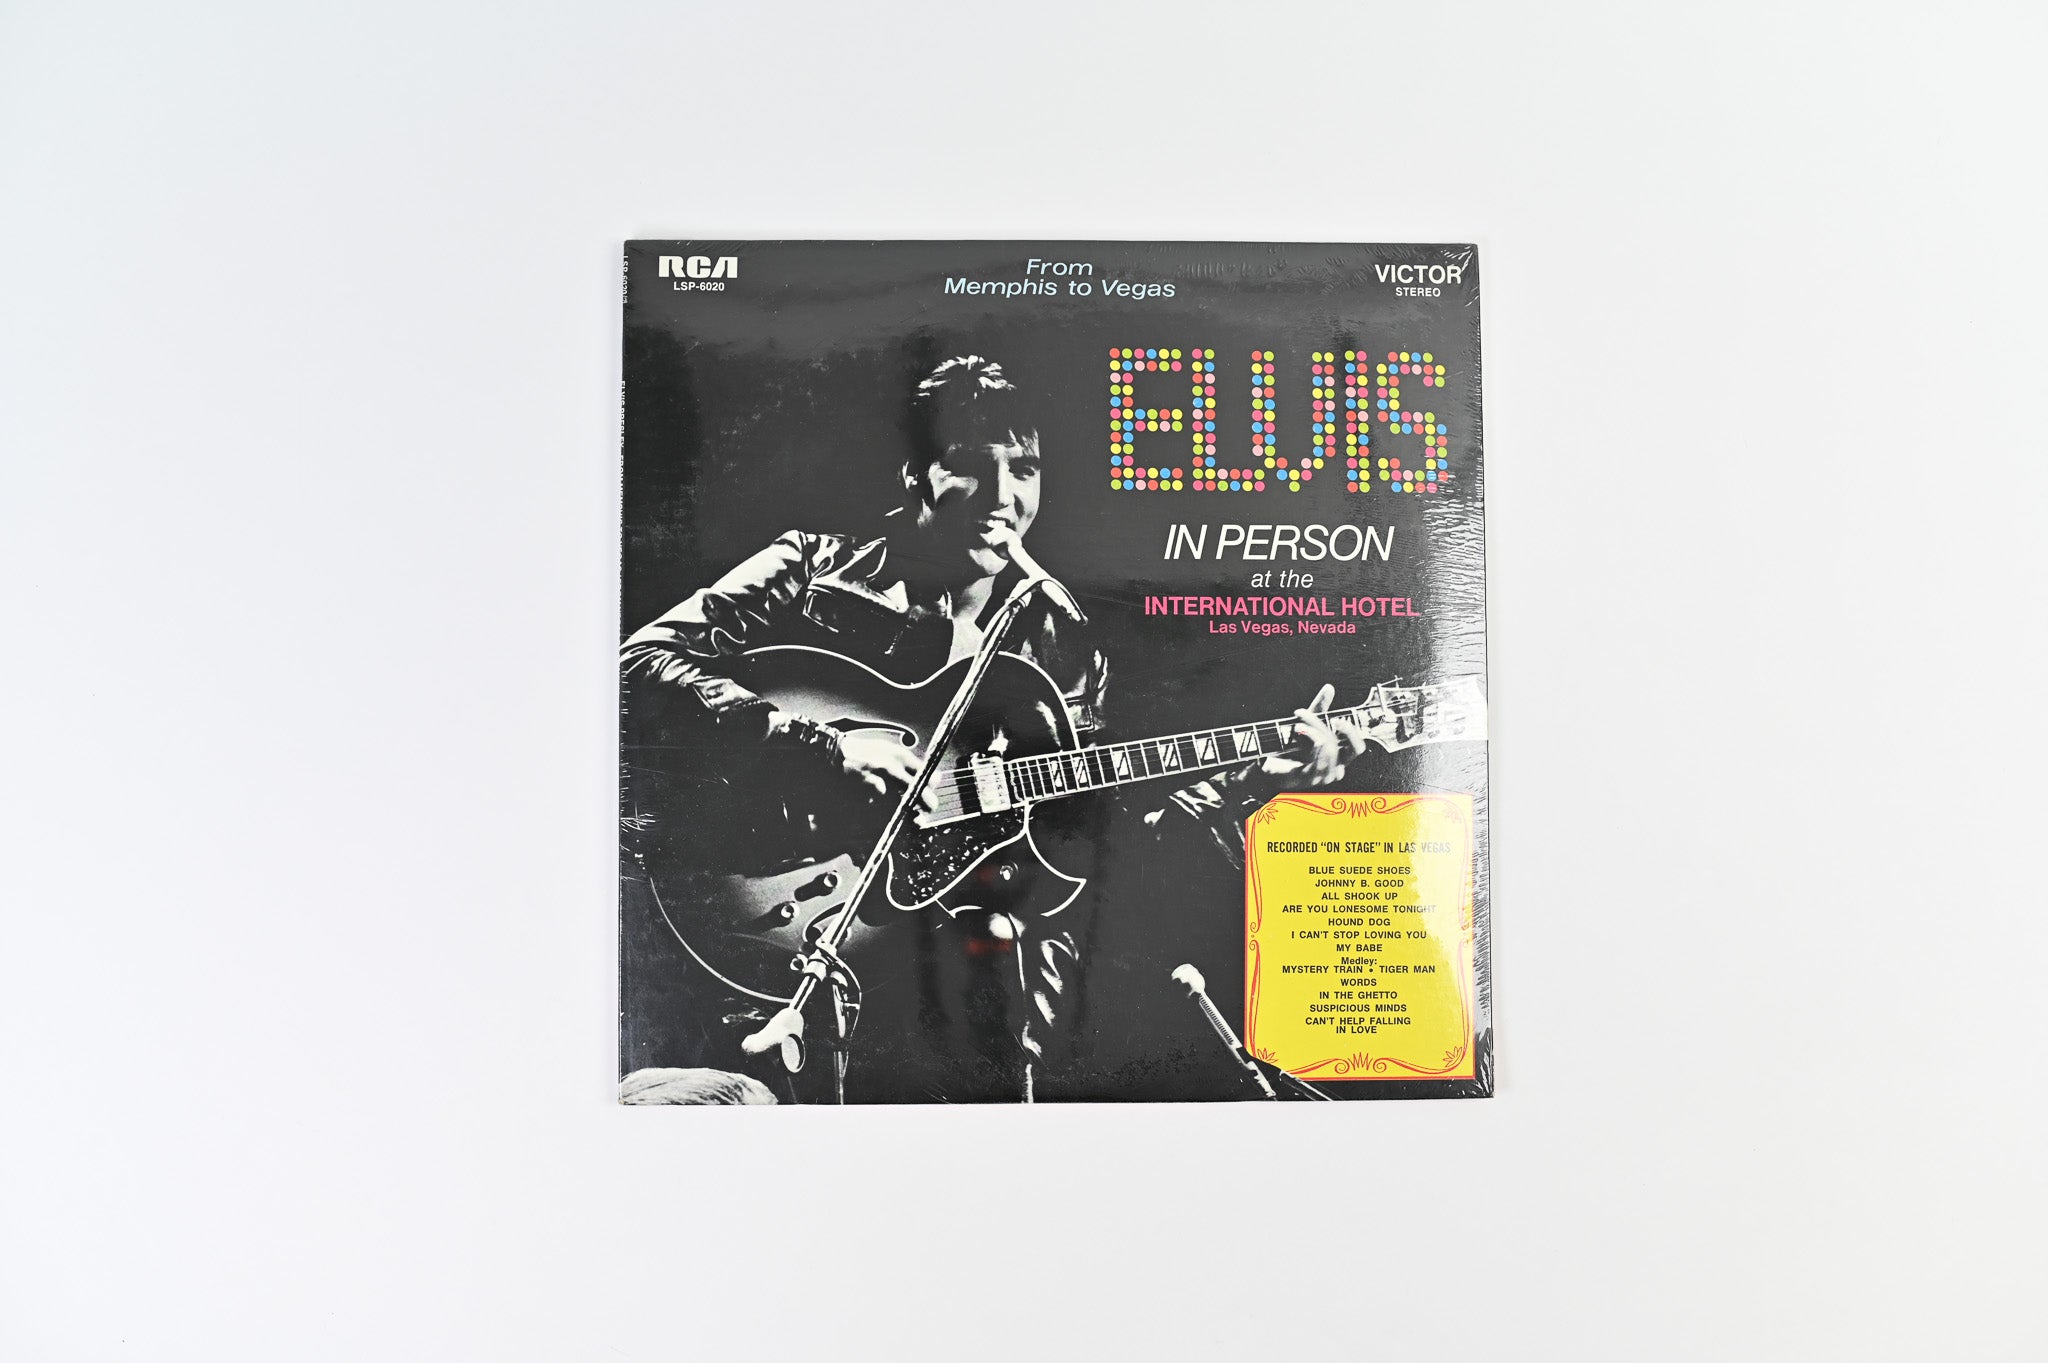 Elvis Presley - From Memphis To Vegas / From Vegas To Memphis on RCA Sealed